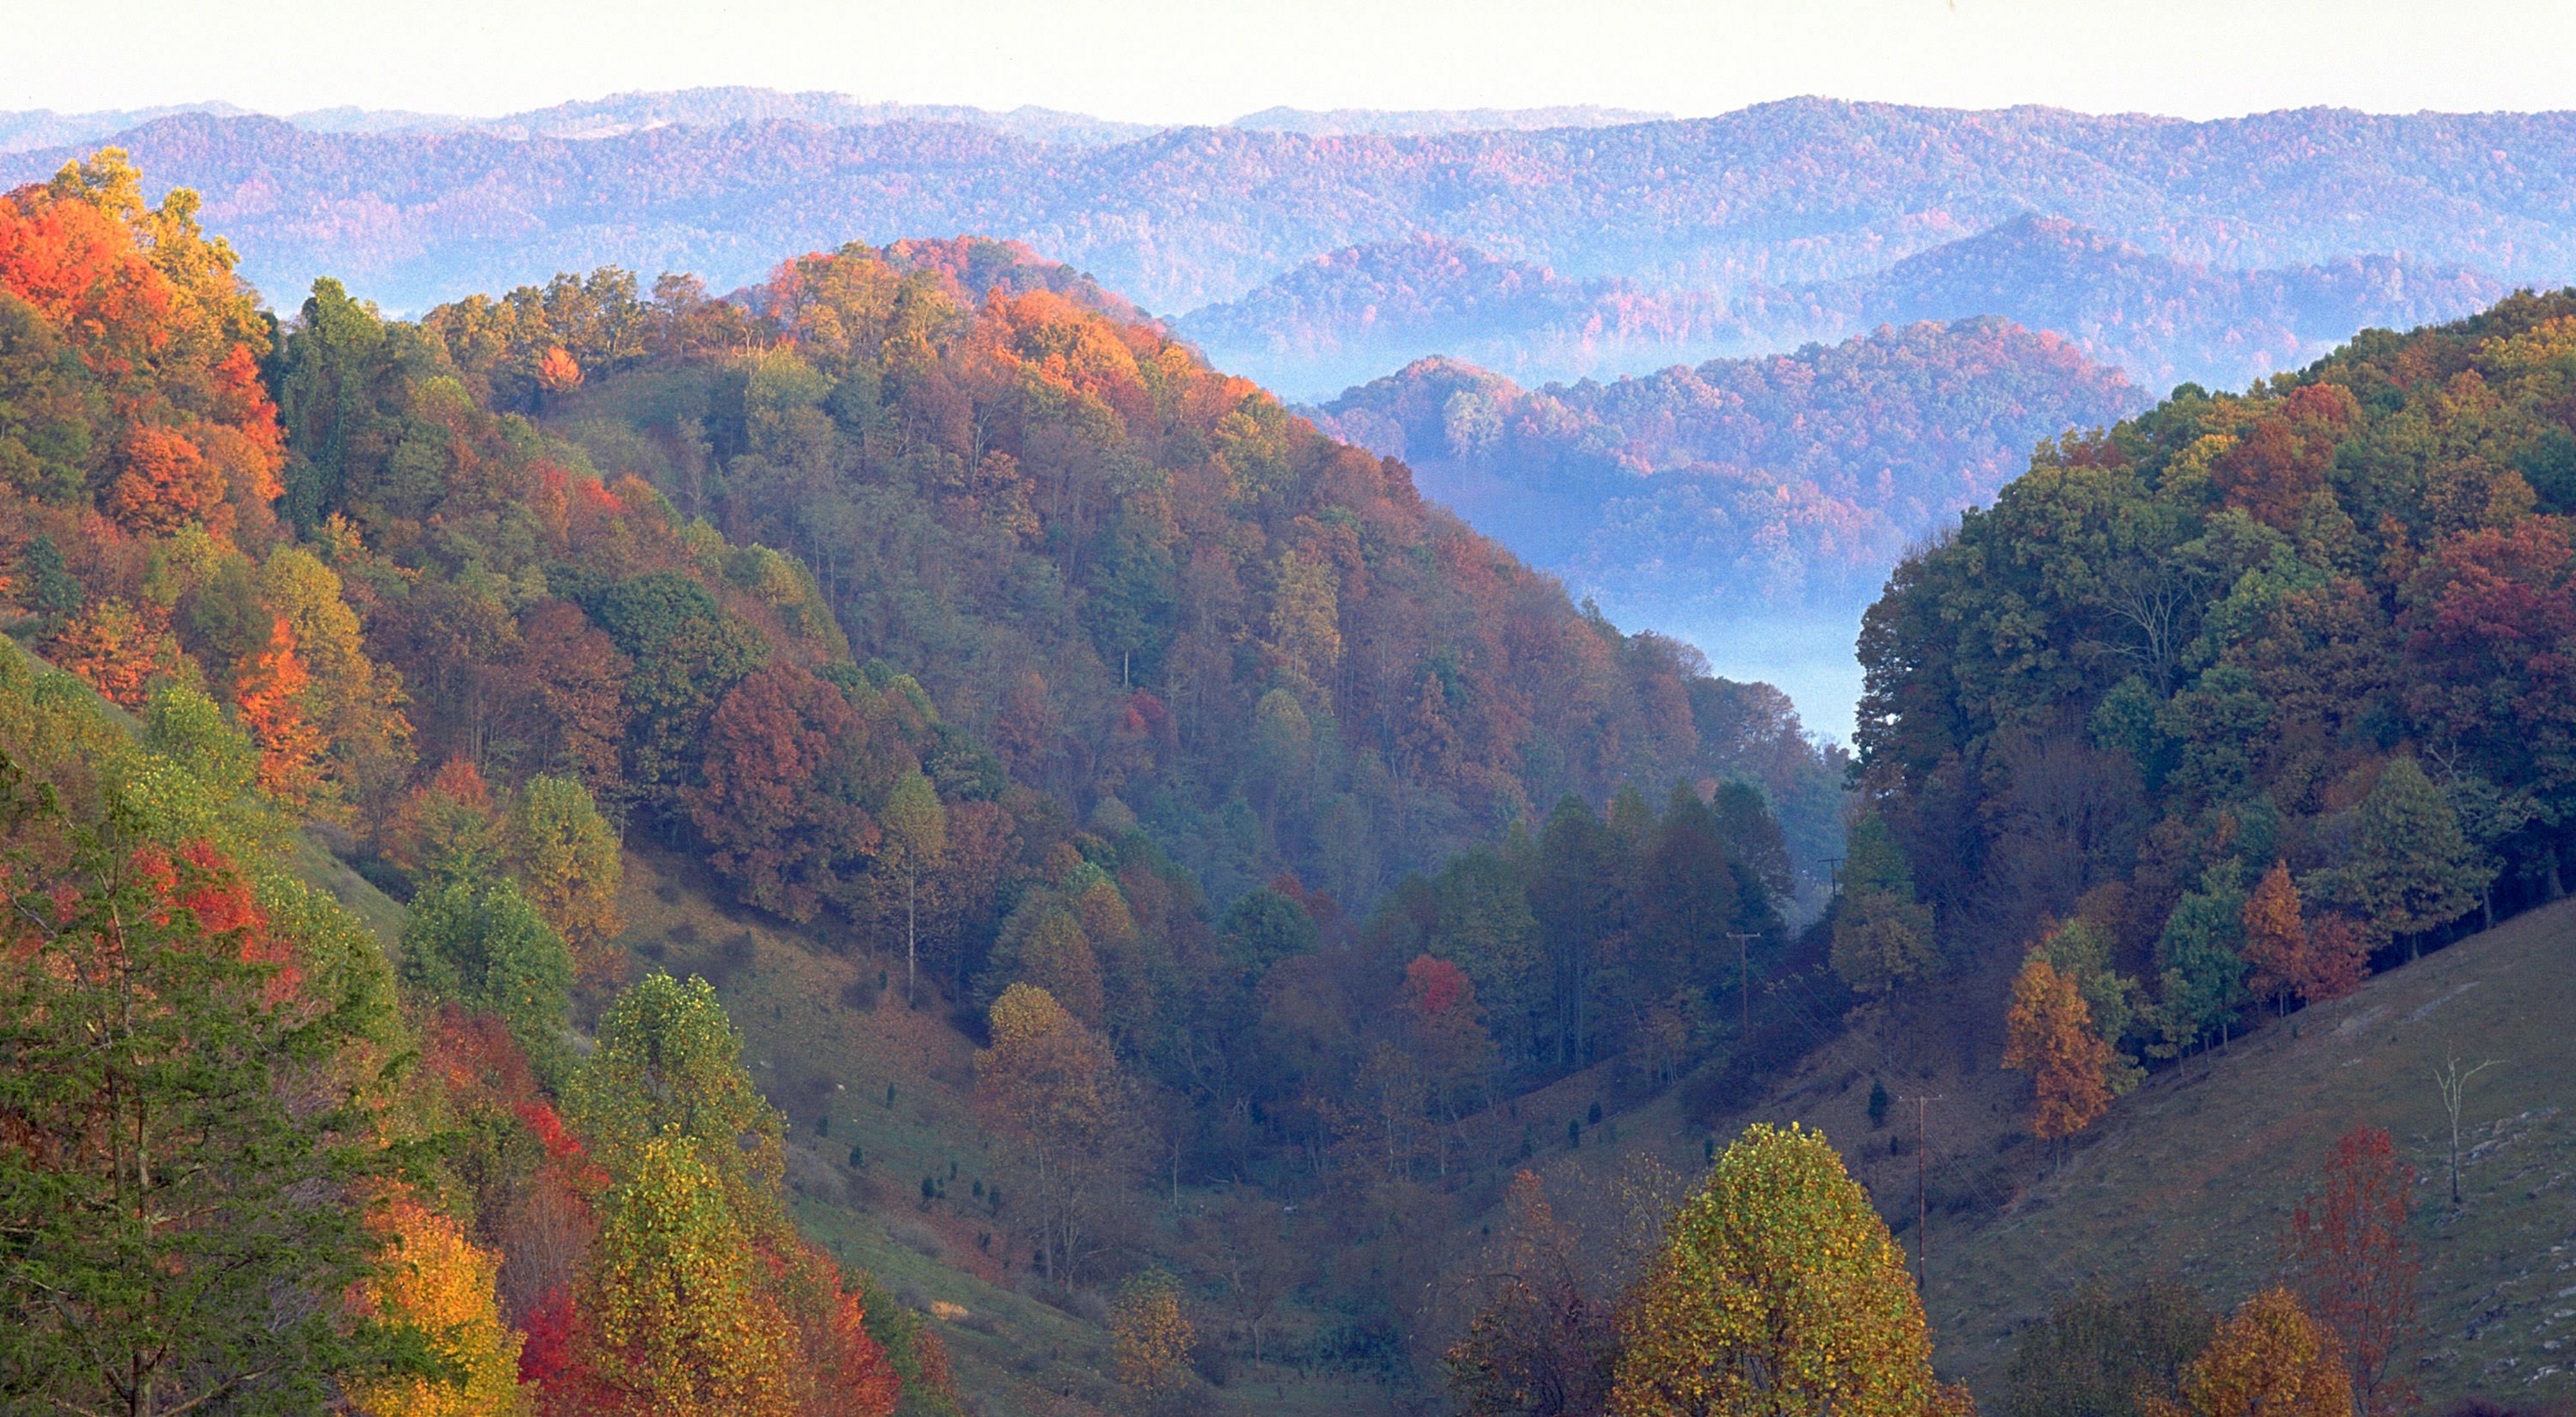 Leaves change color across a forested ridge.